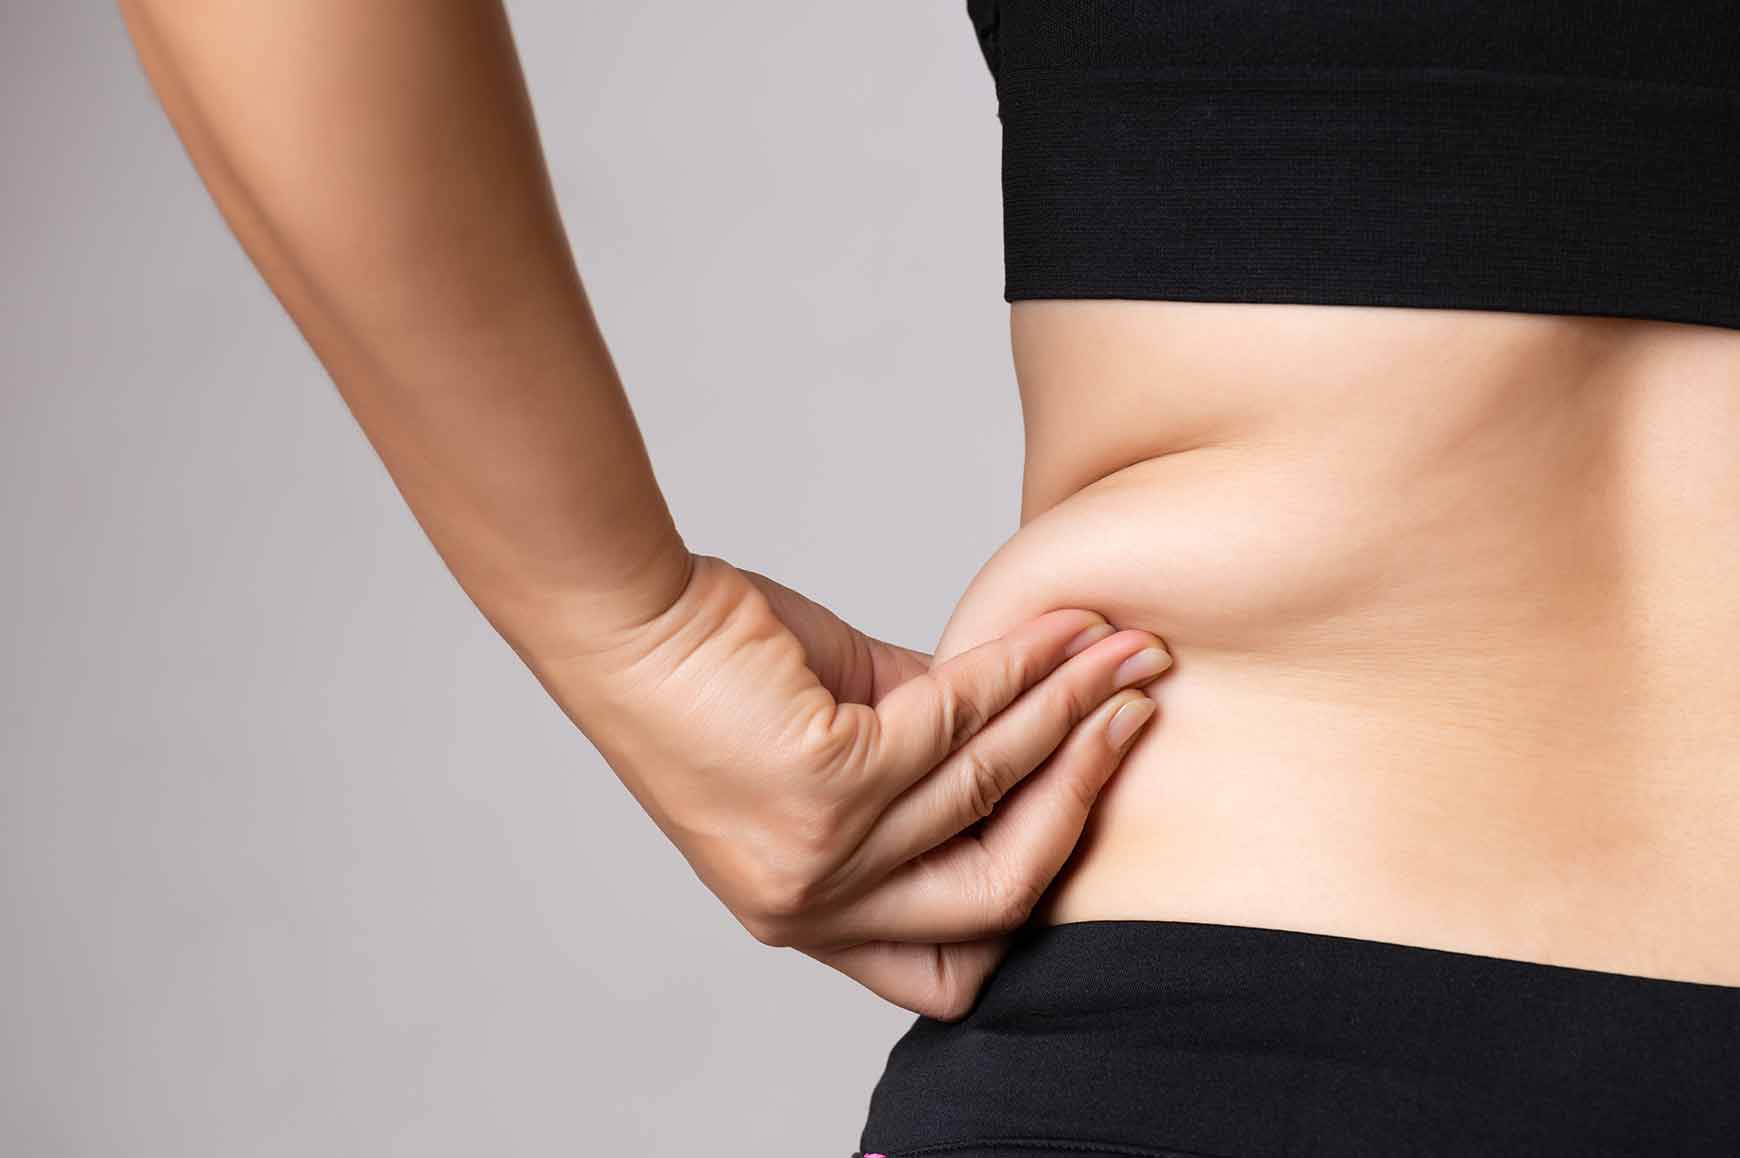 Are you carrying extra weight around your mid-section? A tummy tuck or liposuction may help you get the desired physique.